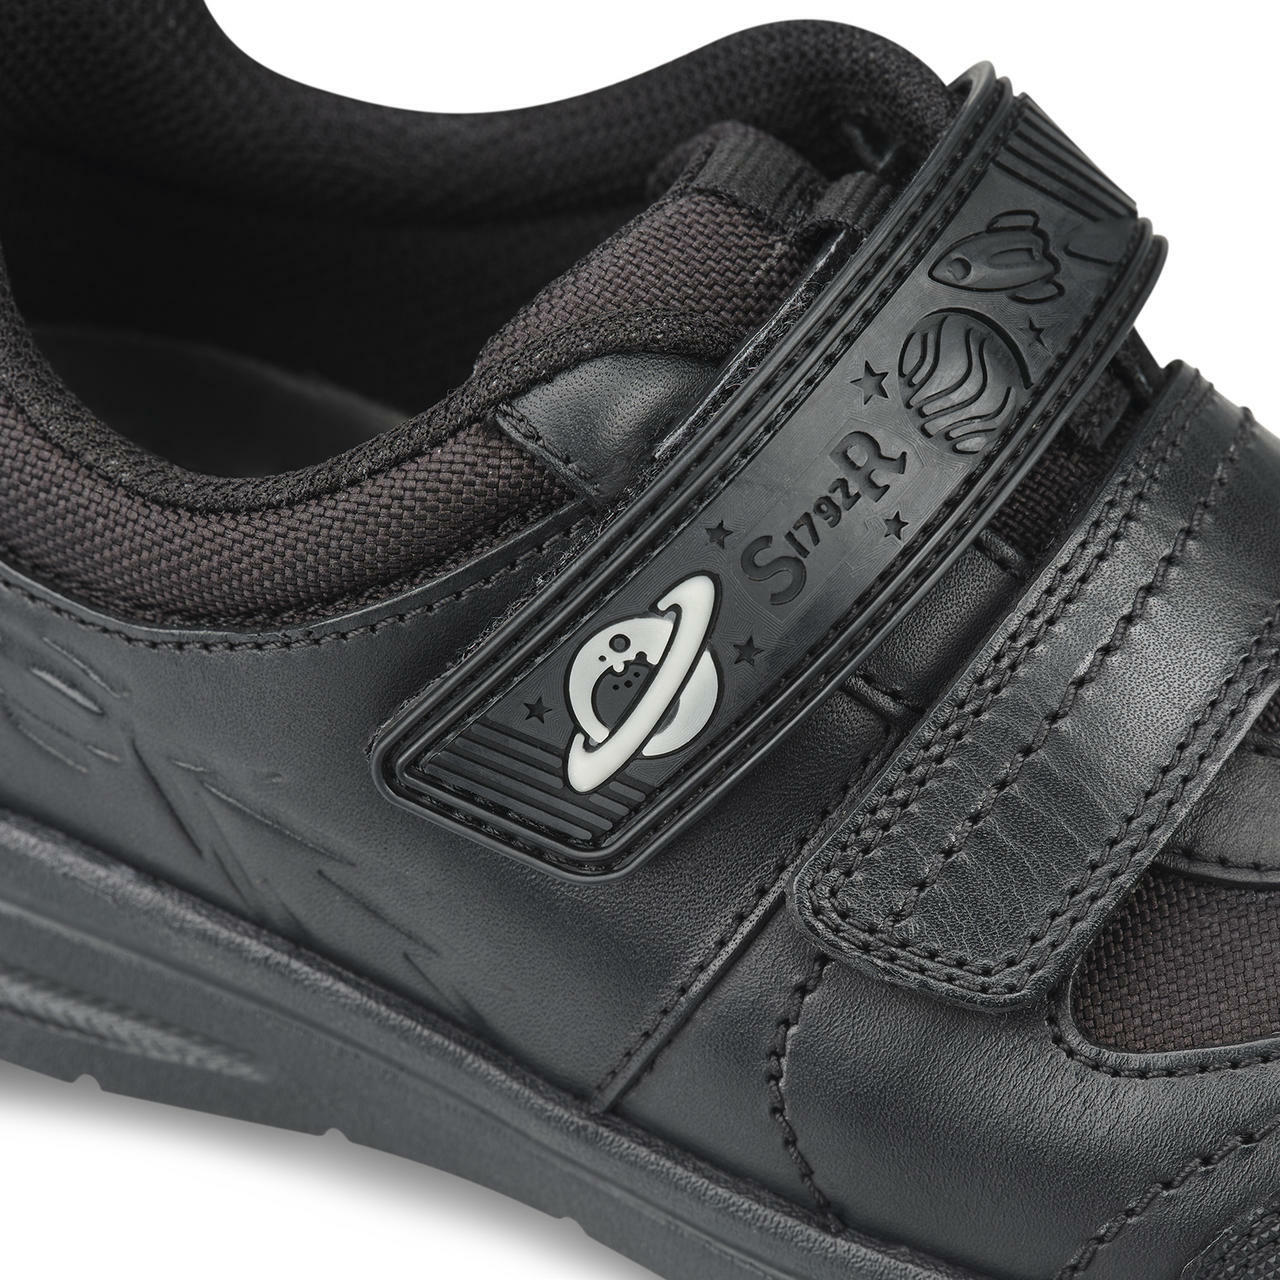 A boy school shoe by Start Rite,style Rocket, in black leather with double velcro fastening. Close up view.